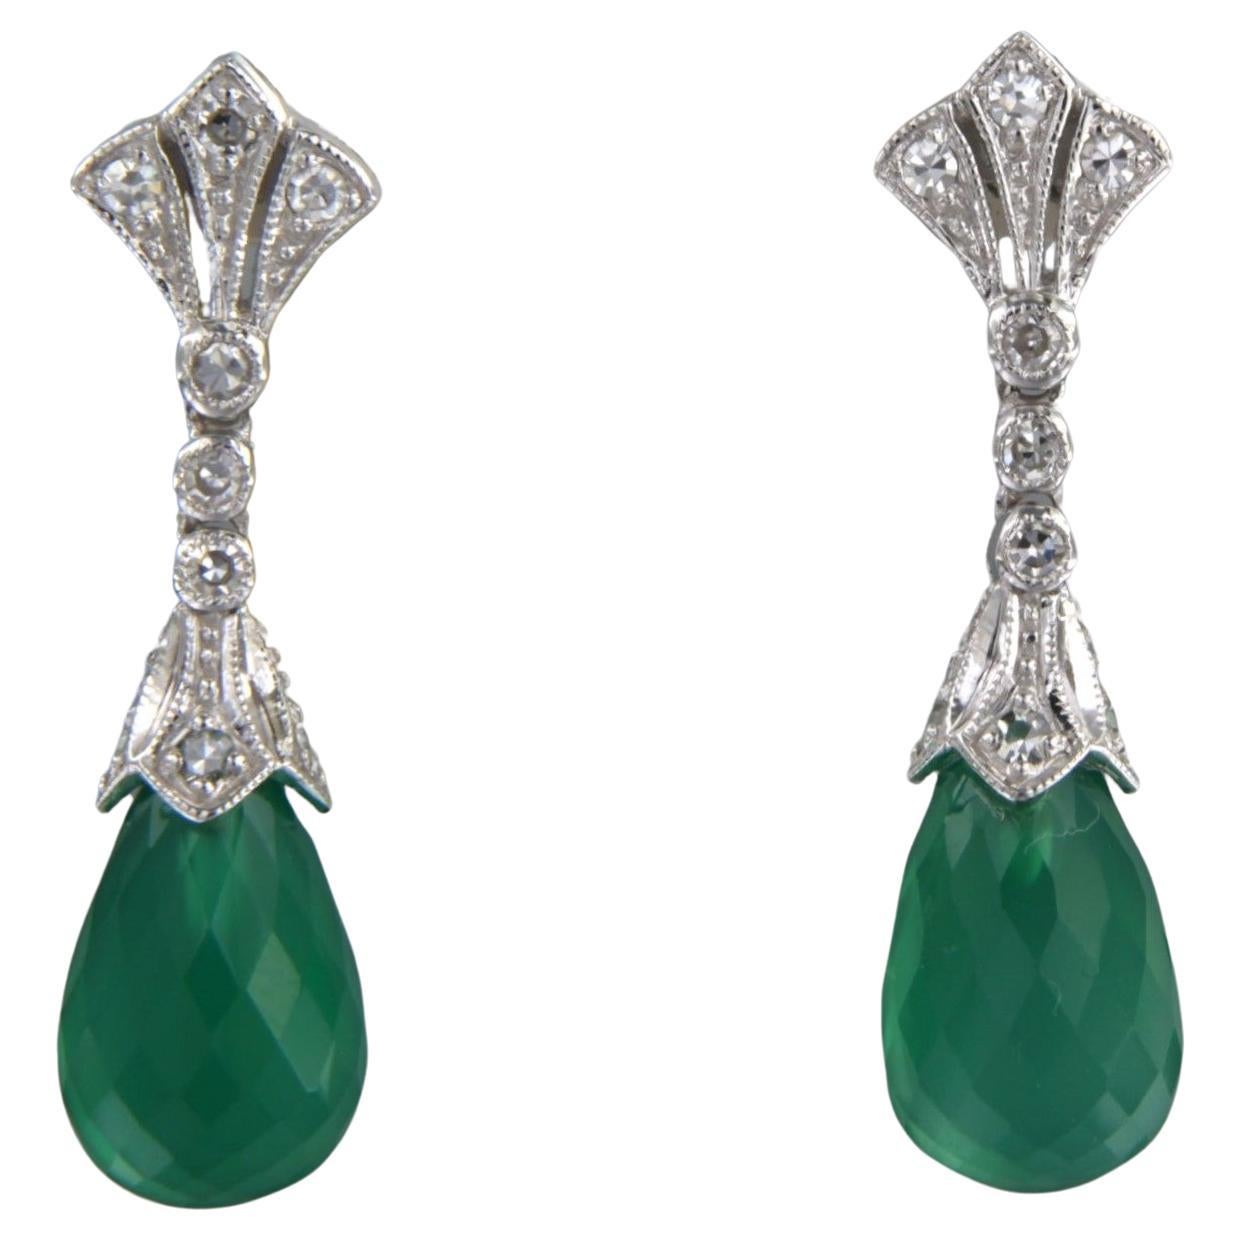 14kt white gold earrings set with green onyx and single cut diamond total 0.34ct For Sale